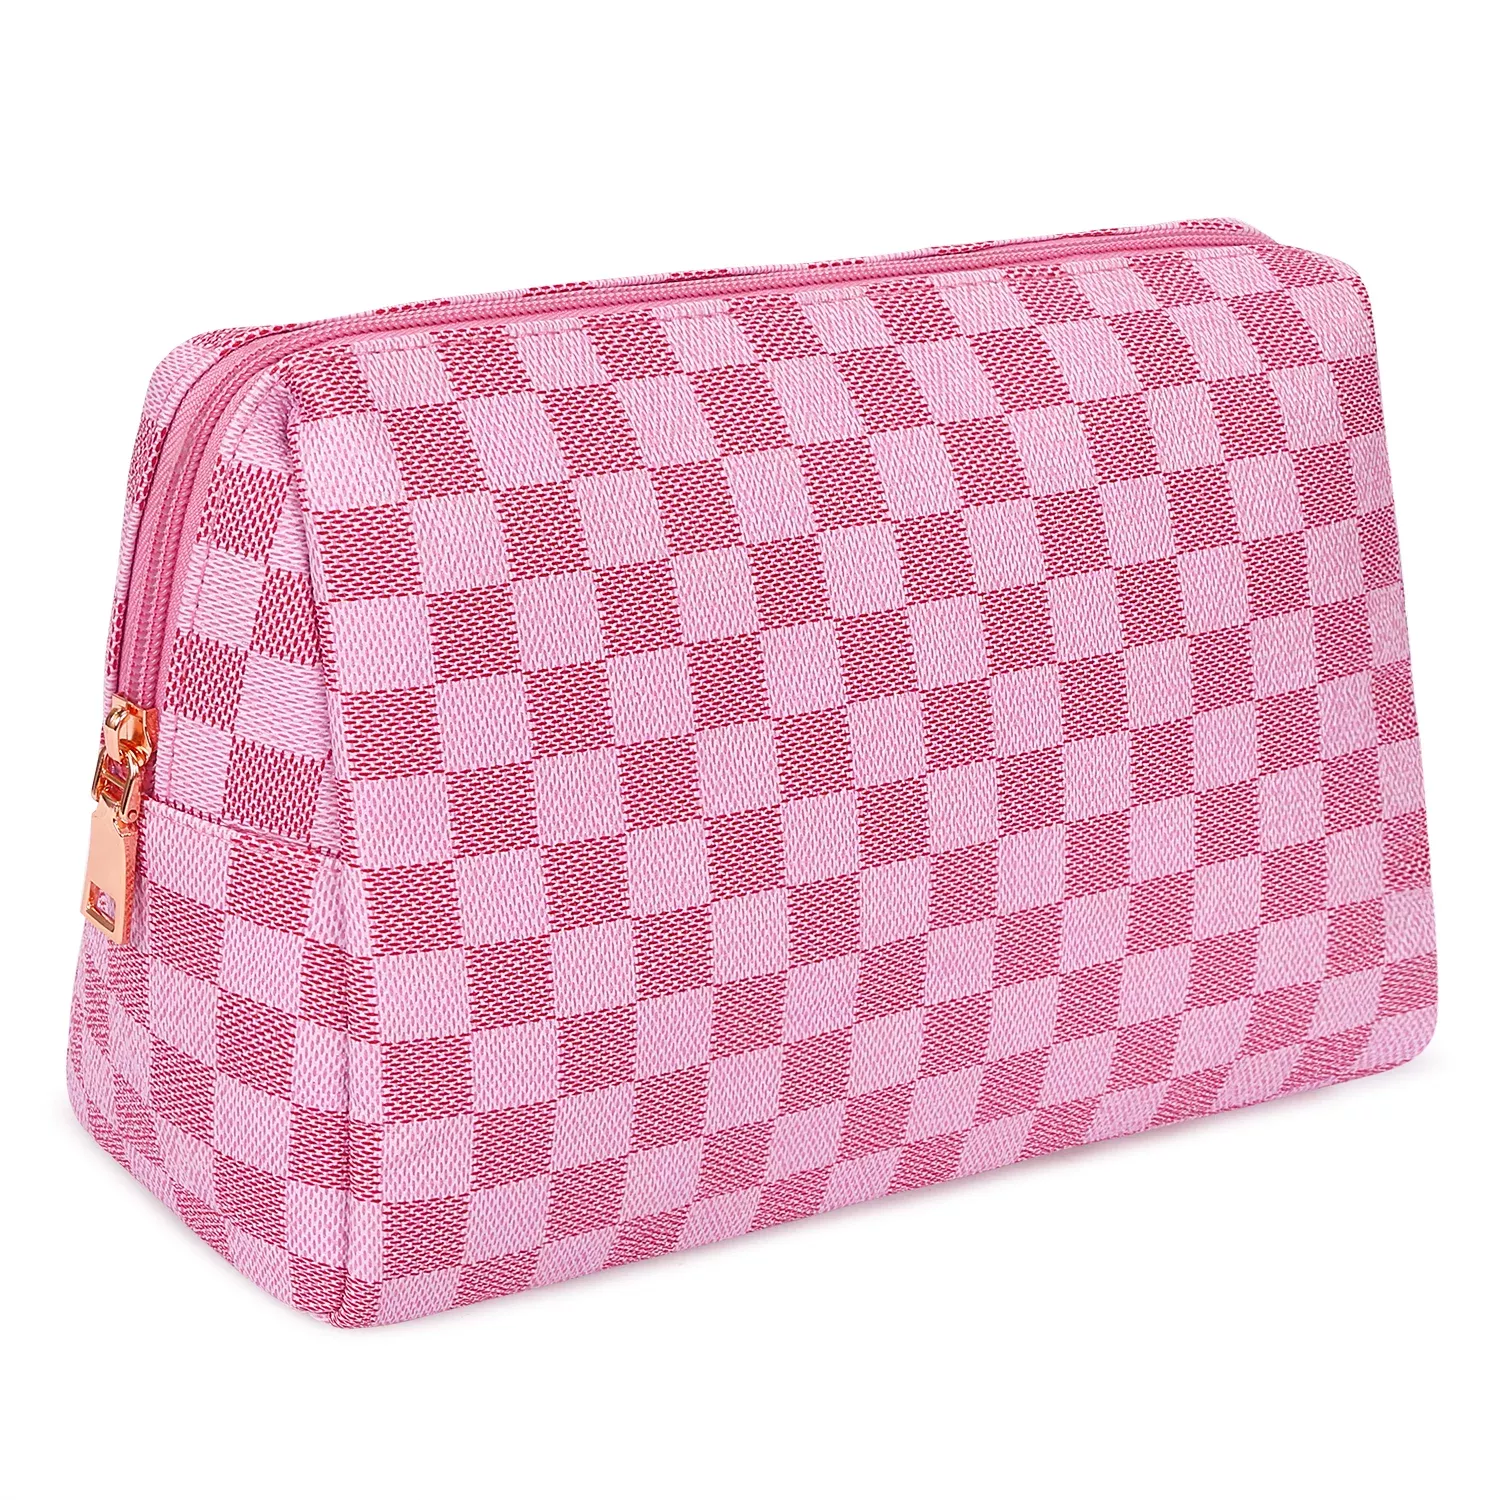 Lumento Brown Checkered Makeup Bag,Travel Storage Cosmetic Bag,PU Vegan  Leather Make Up Pouch,Portable Toiletry Organizer 